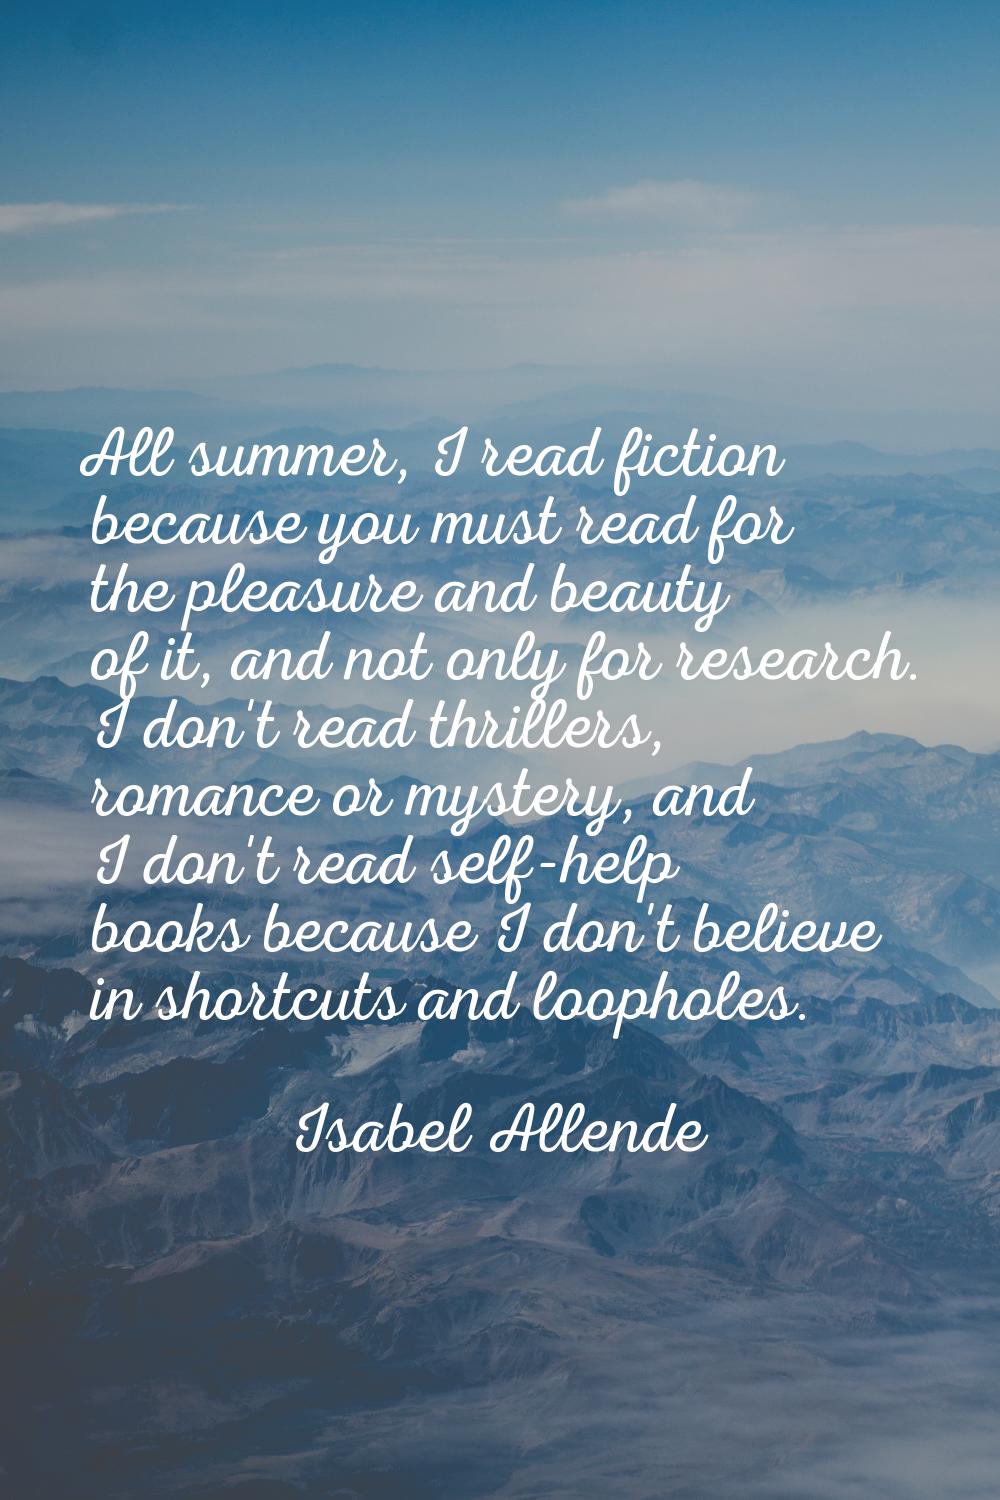 All summer, I read fiction because you must read for the pleasure and beauty of it, and not only fo